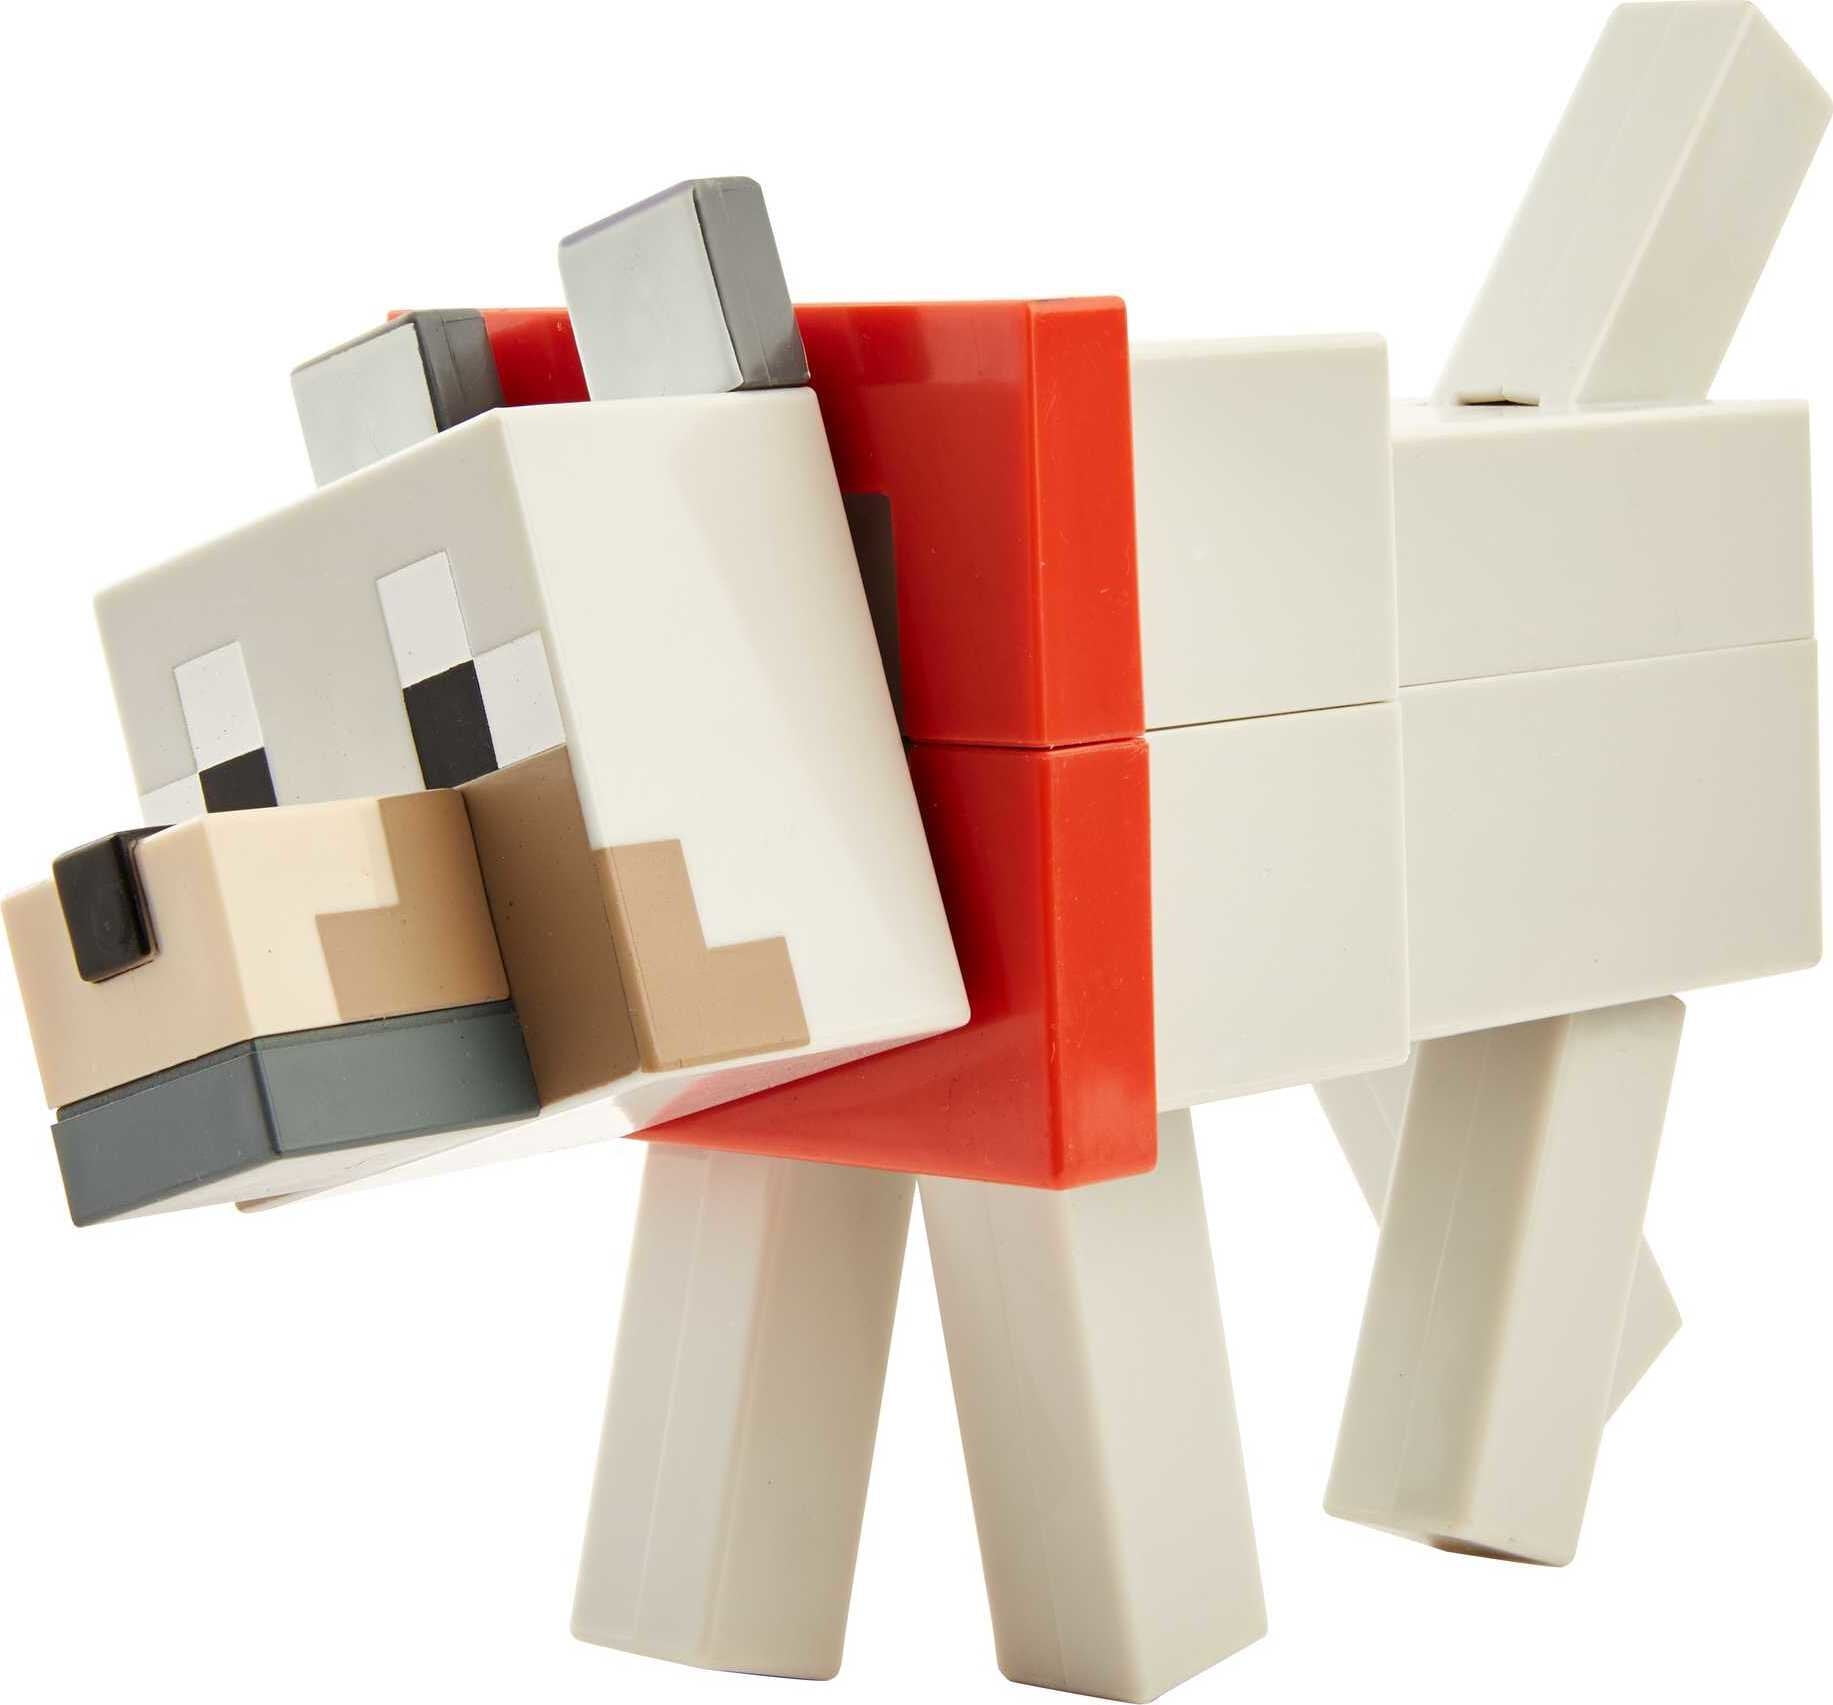 Minecraft Toys fusion Figures, Building Toy for Kids 